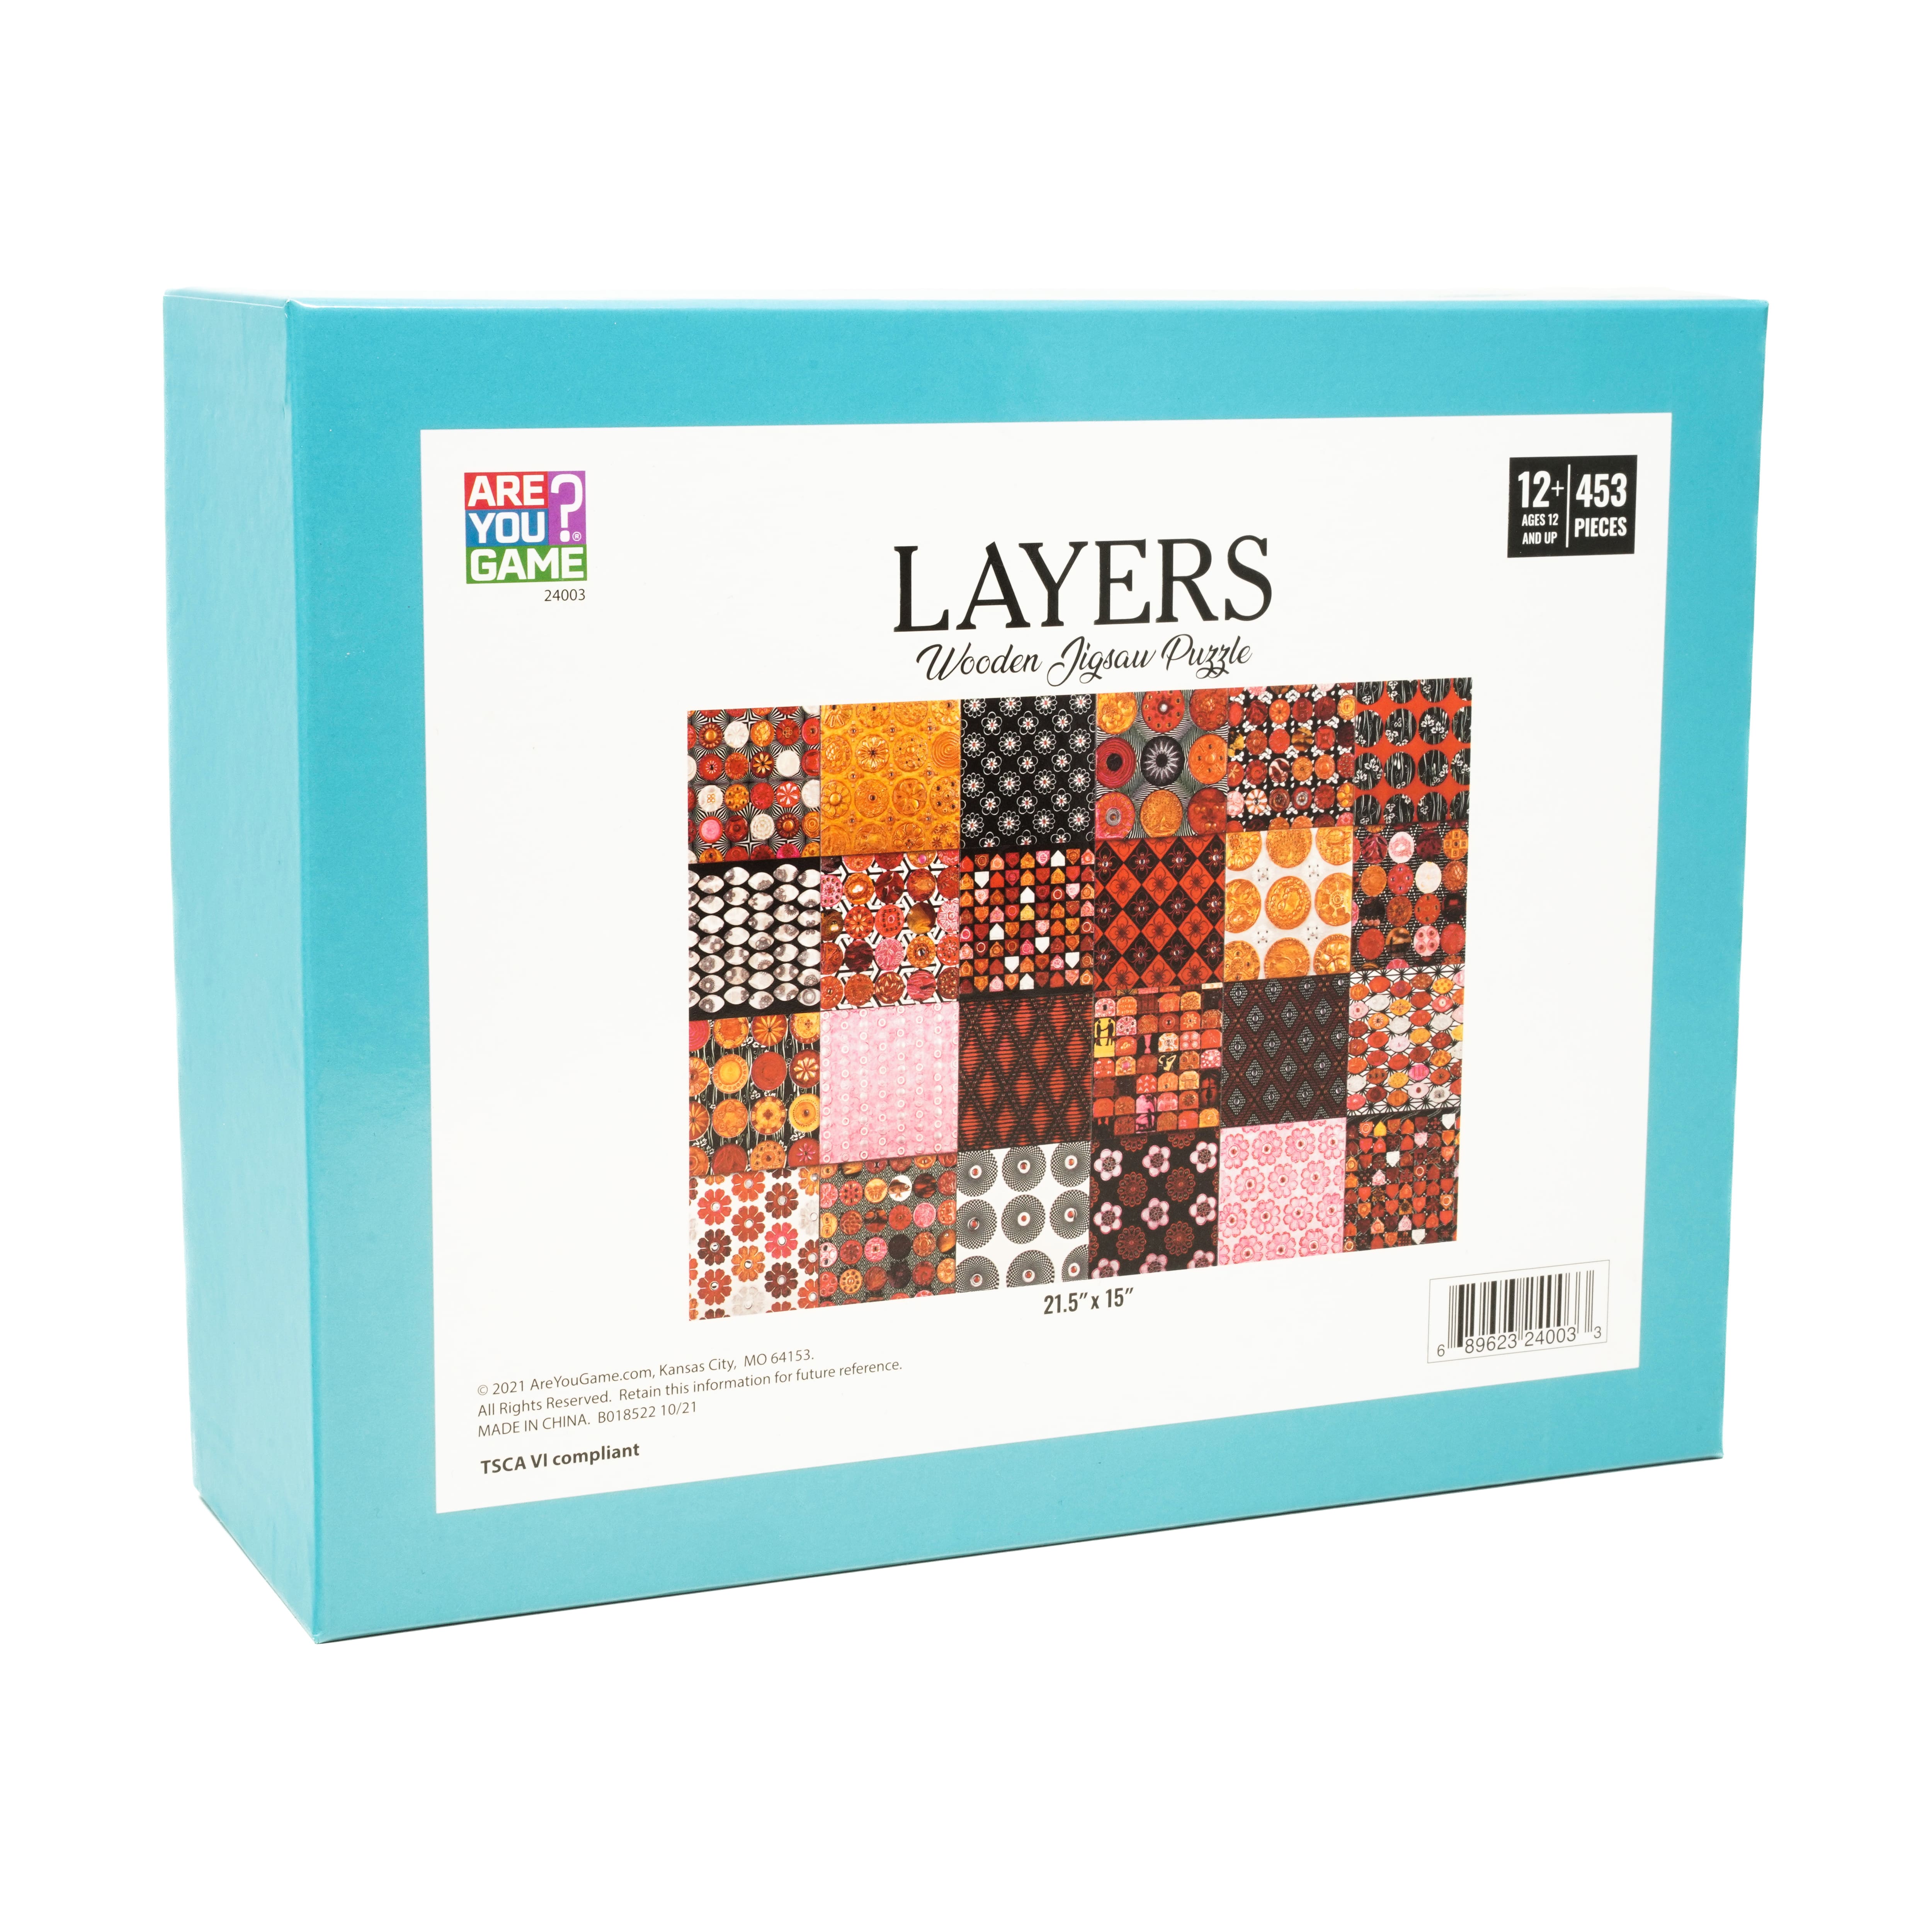 Wooden Jigsaw Puzzle - Layers: 453 Pcs